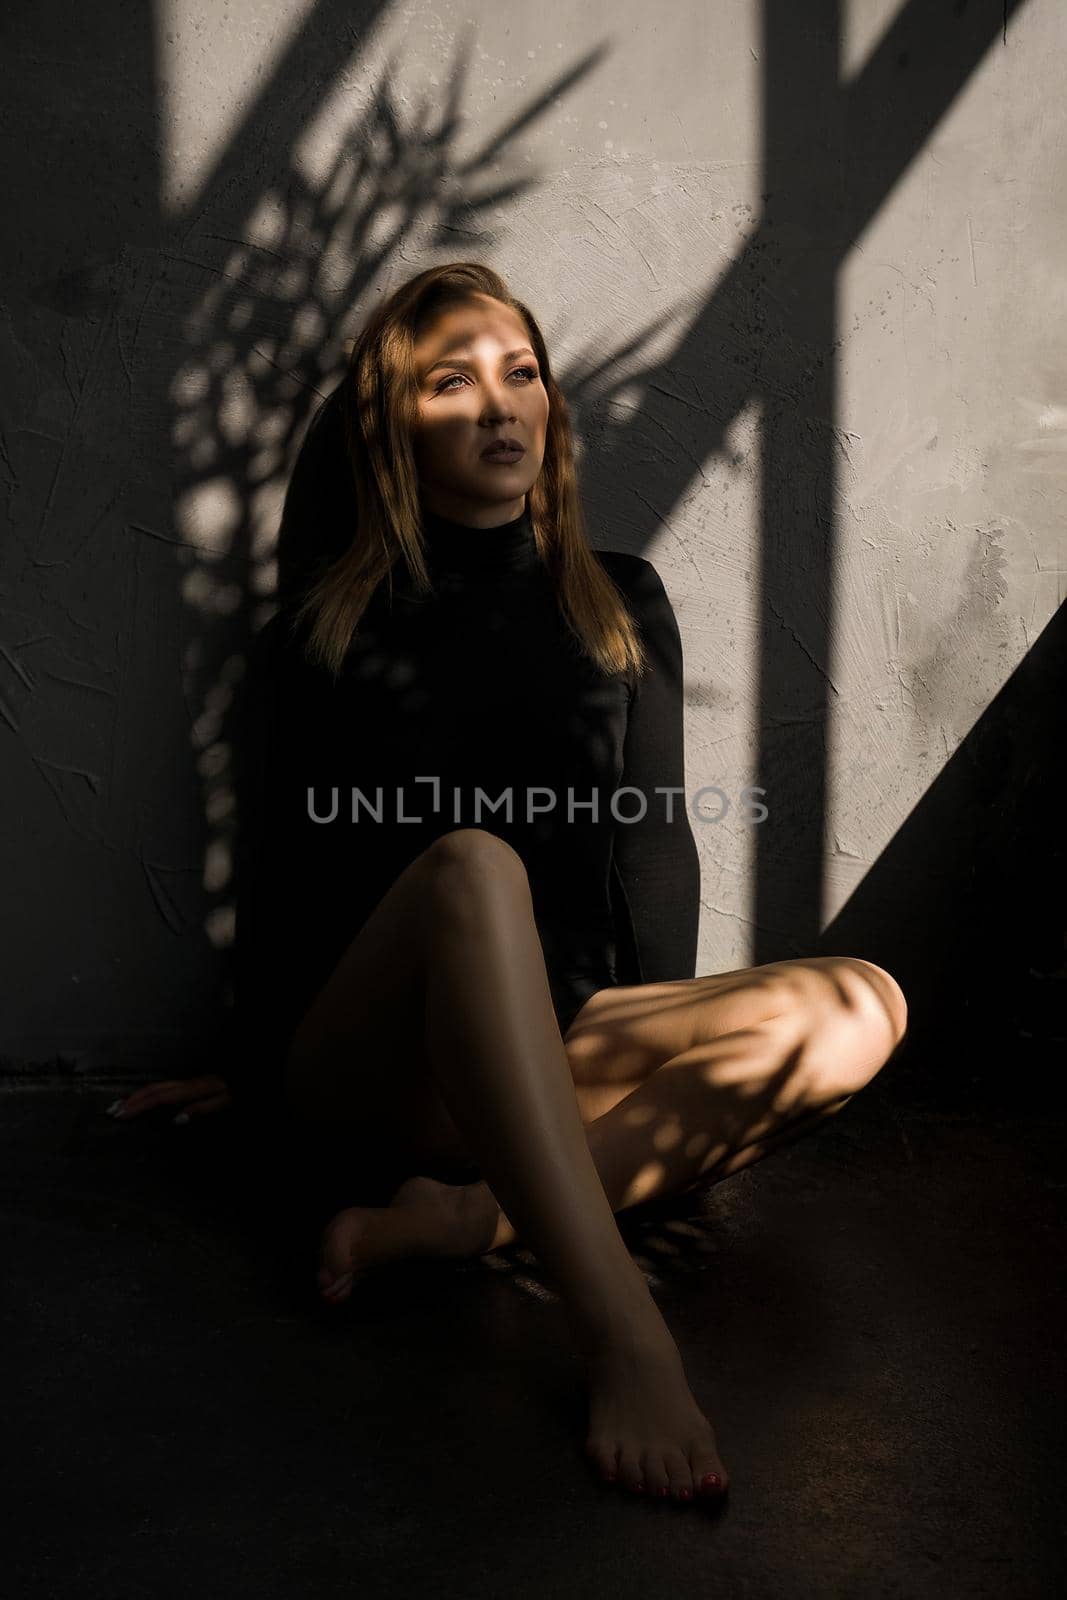 Fashion photo of sensual woman. She sits on the floor next to the window, a shadow on her